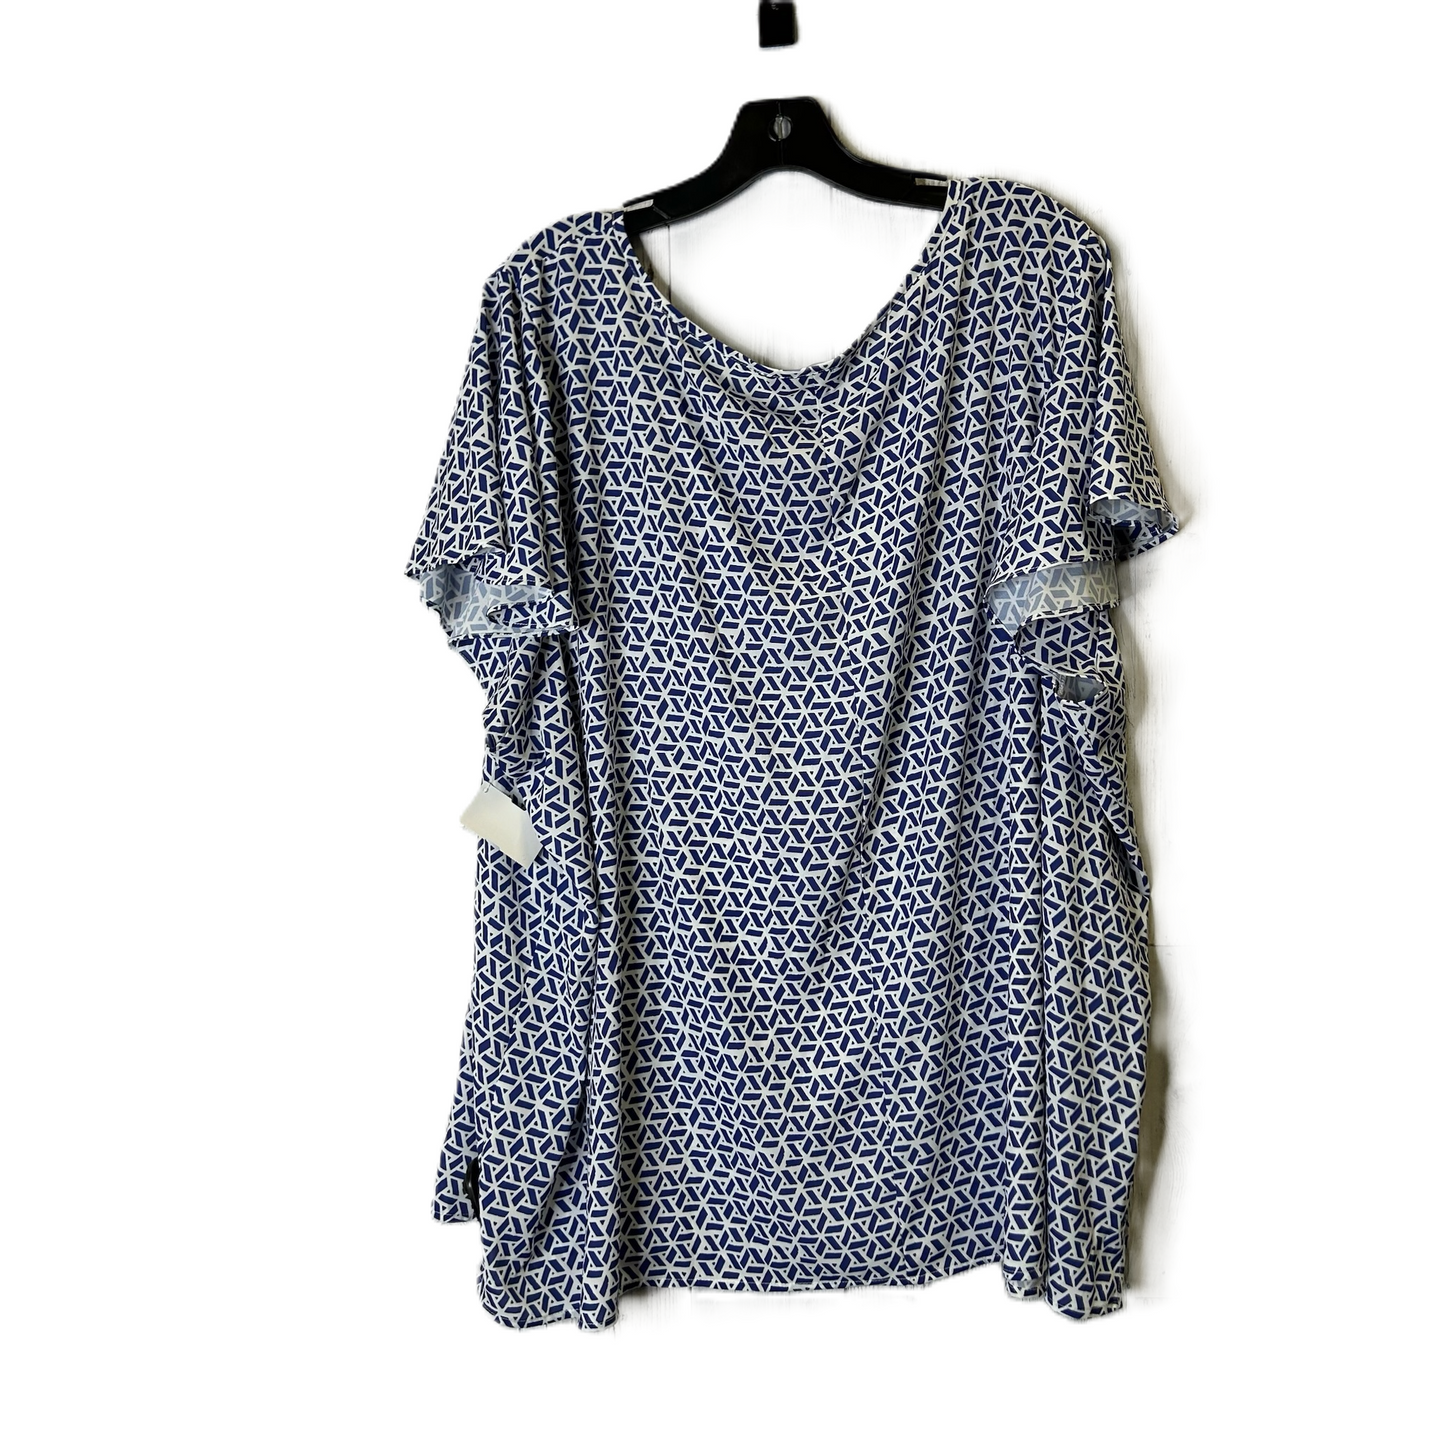 Blue Top Short Sleeve By Eloquii, Size: 4x